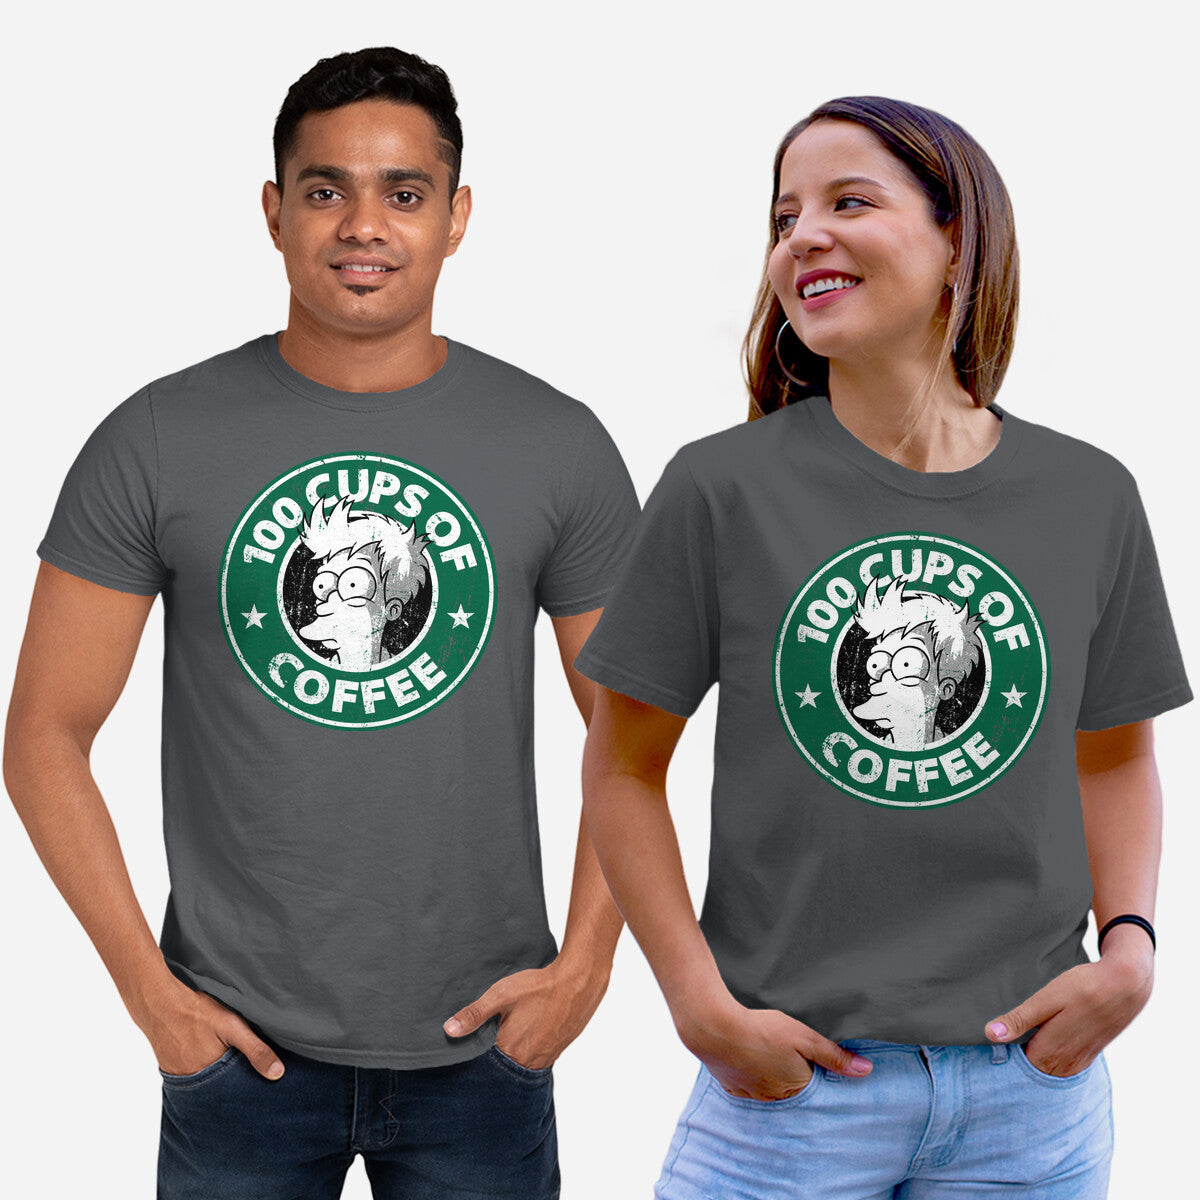 100 Cups of Coffee - T-Shirt